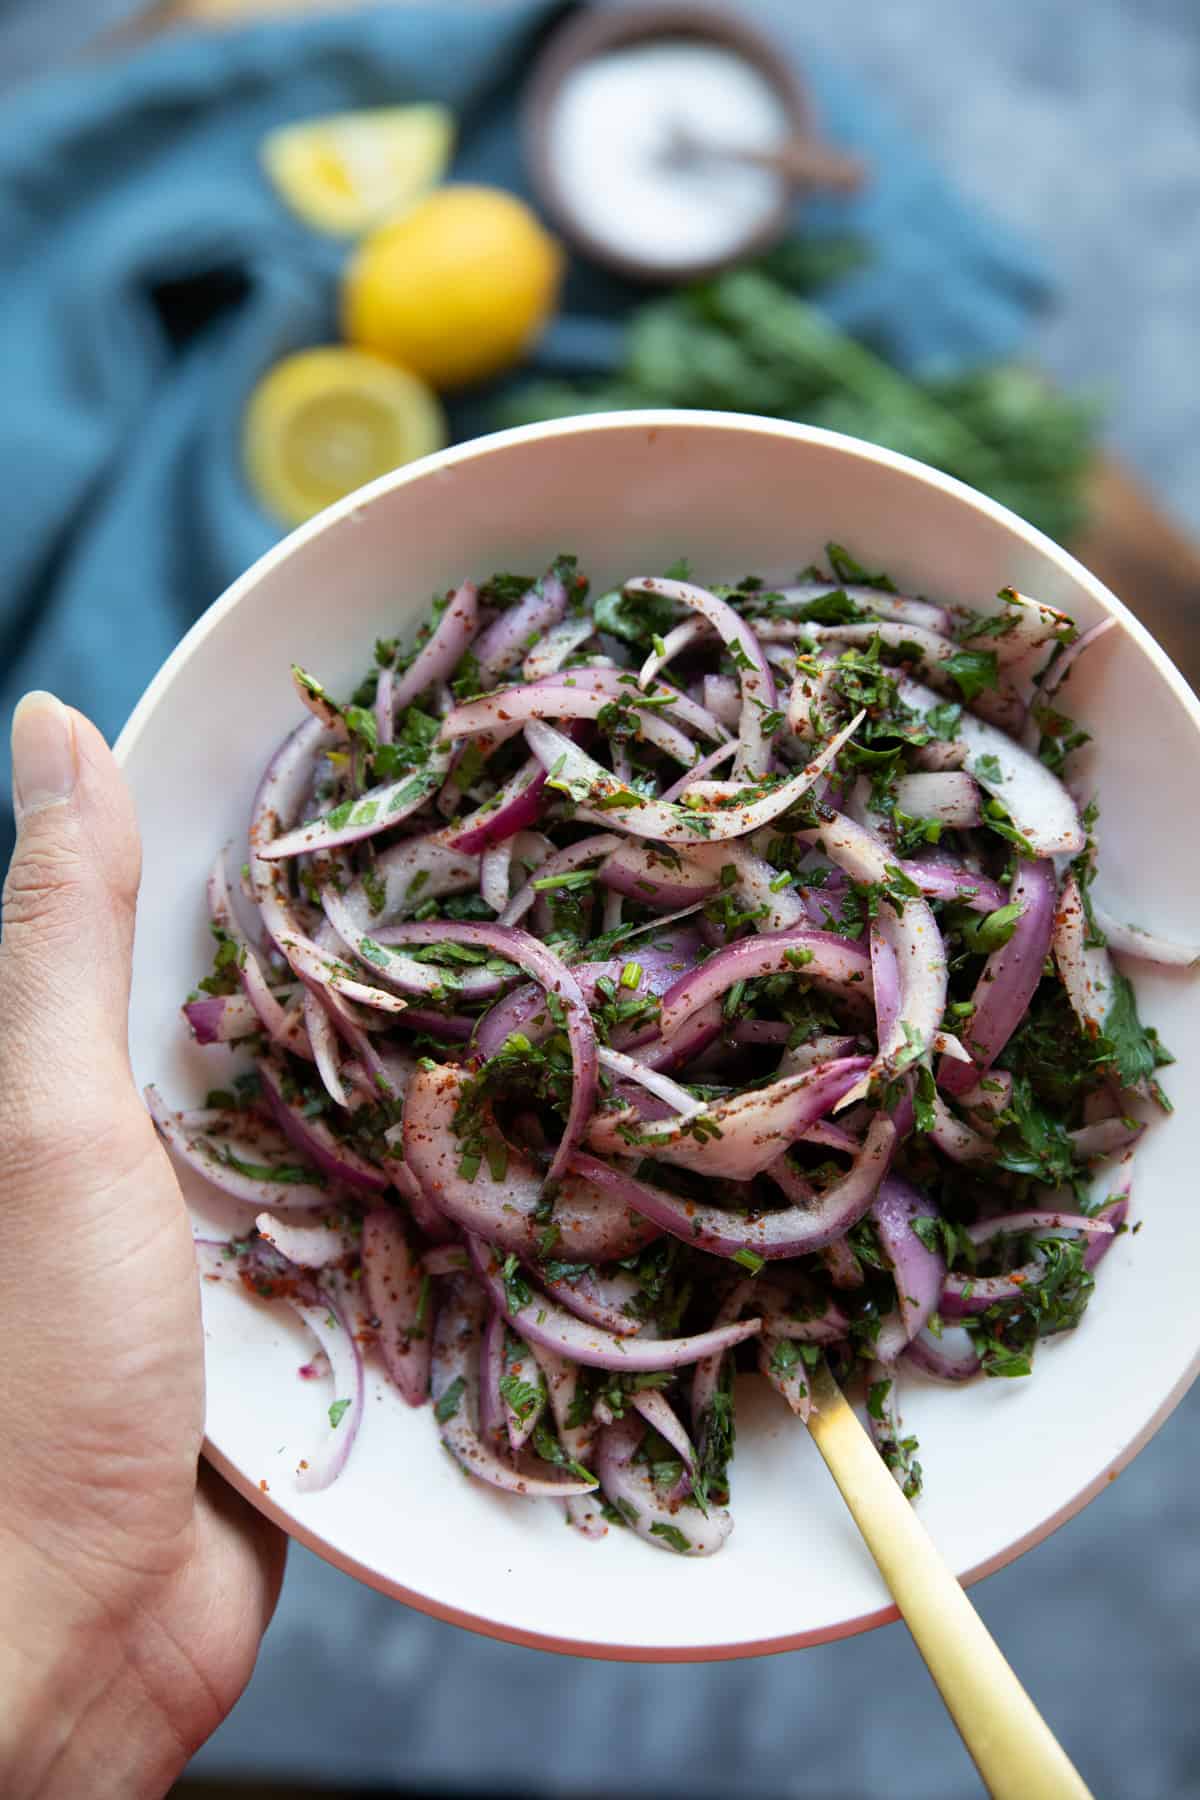 Turkish sumac onions are ready in 10 minutes and make an ideal companion to a wide variety of dishes. Crispy red onions are marinated with lemon juice, sumac and herbs - all you need to add a lot of bright flavors to any dish!
